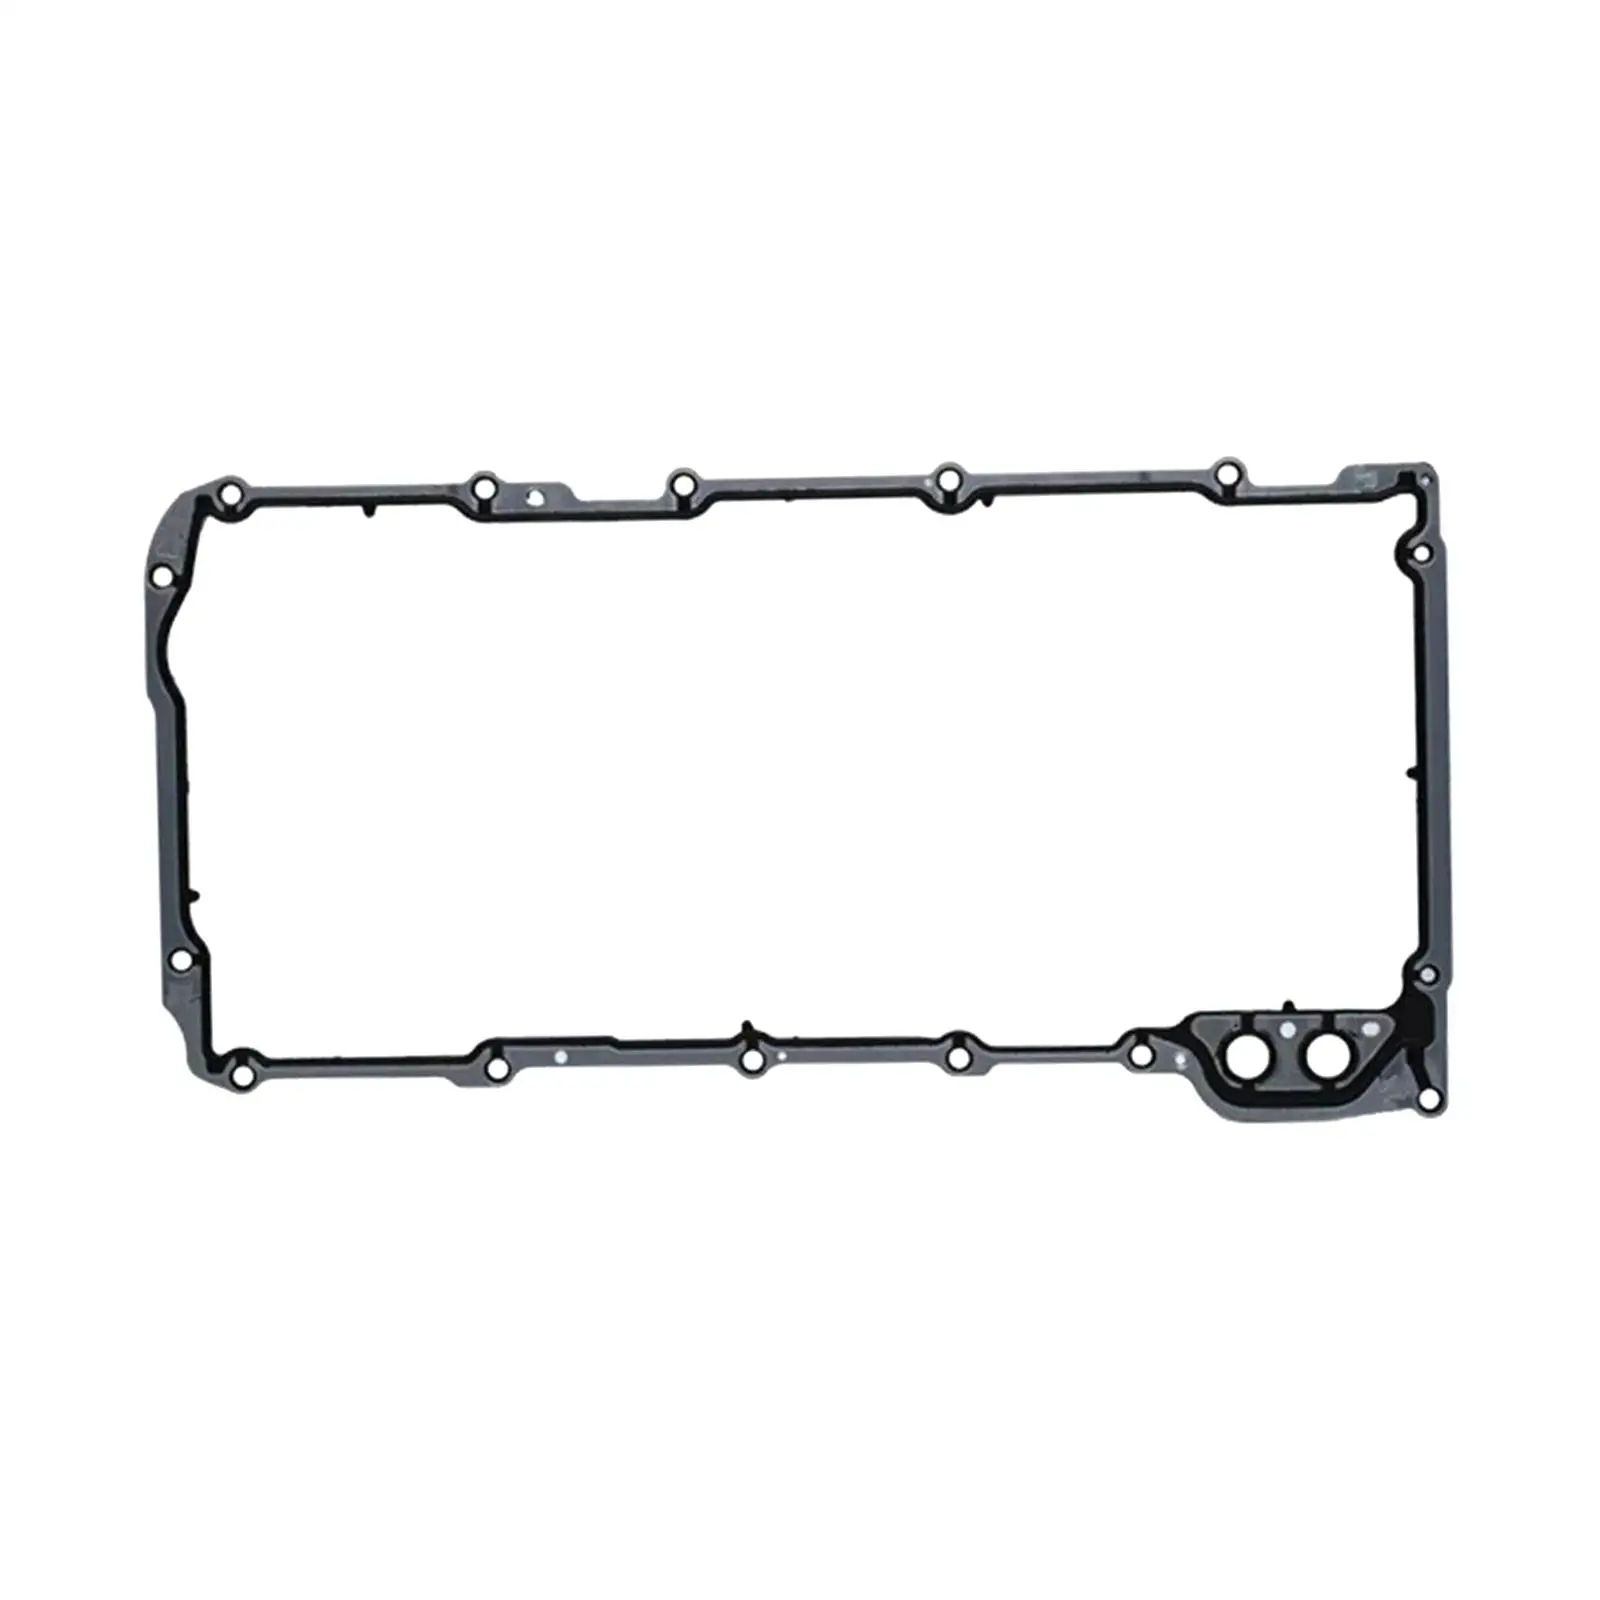 Oil Pan Gasket OS32241 for Hummer Spare Parts Replacement Premium Car Accessories